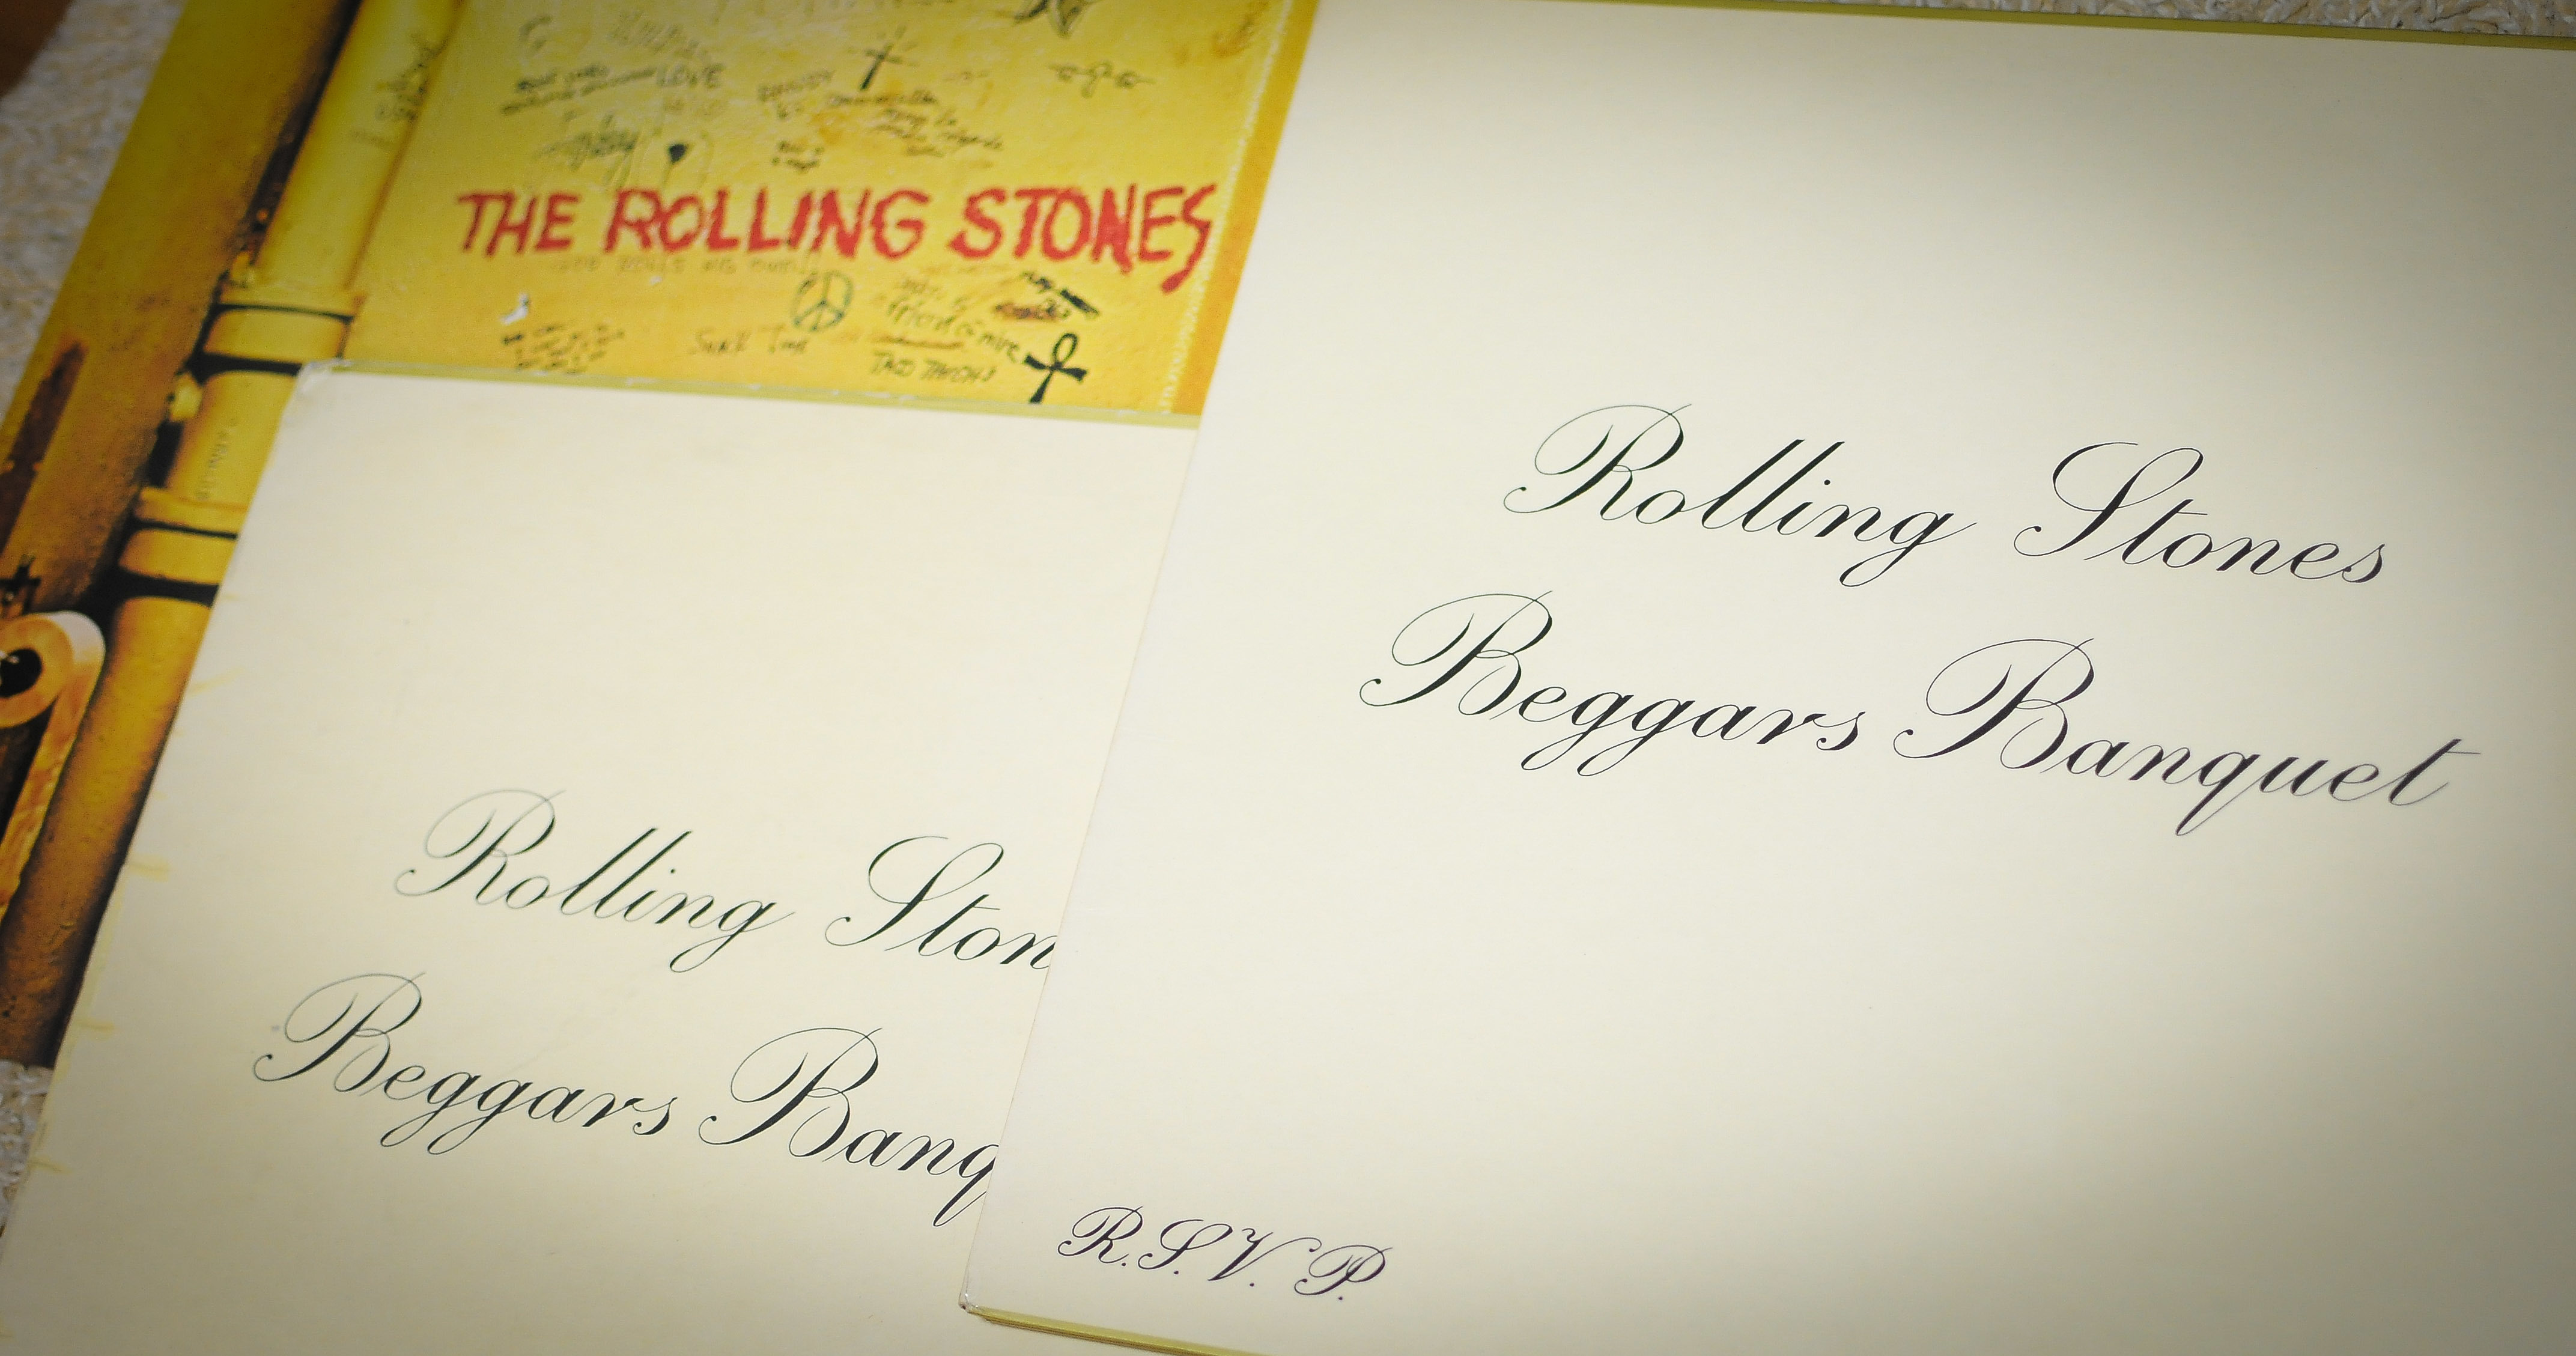 The Rolling Stones - Beggars Banquet STEREO SKL4955 - The Rolling